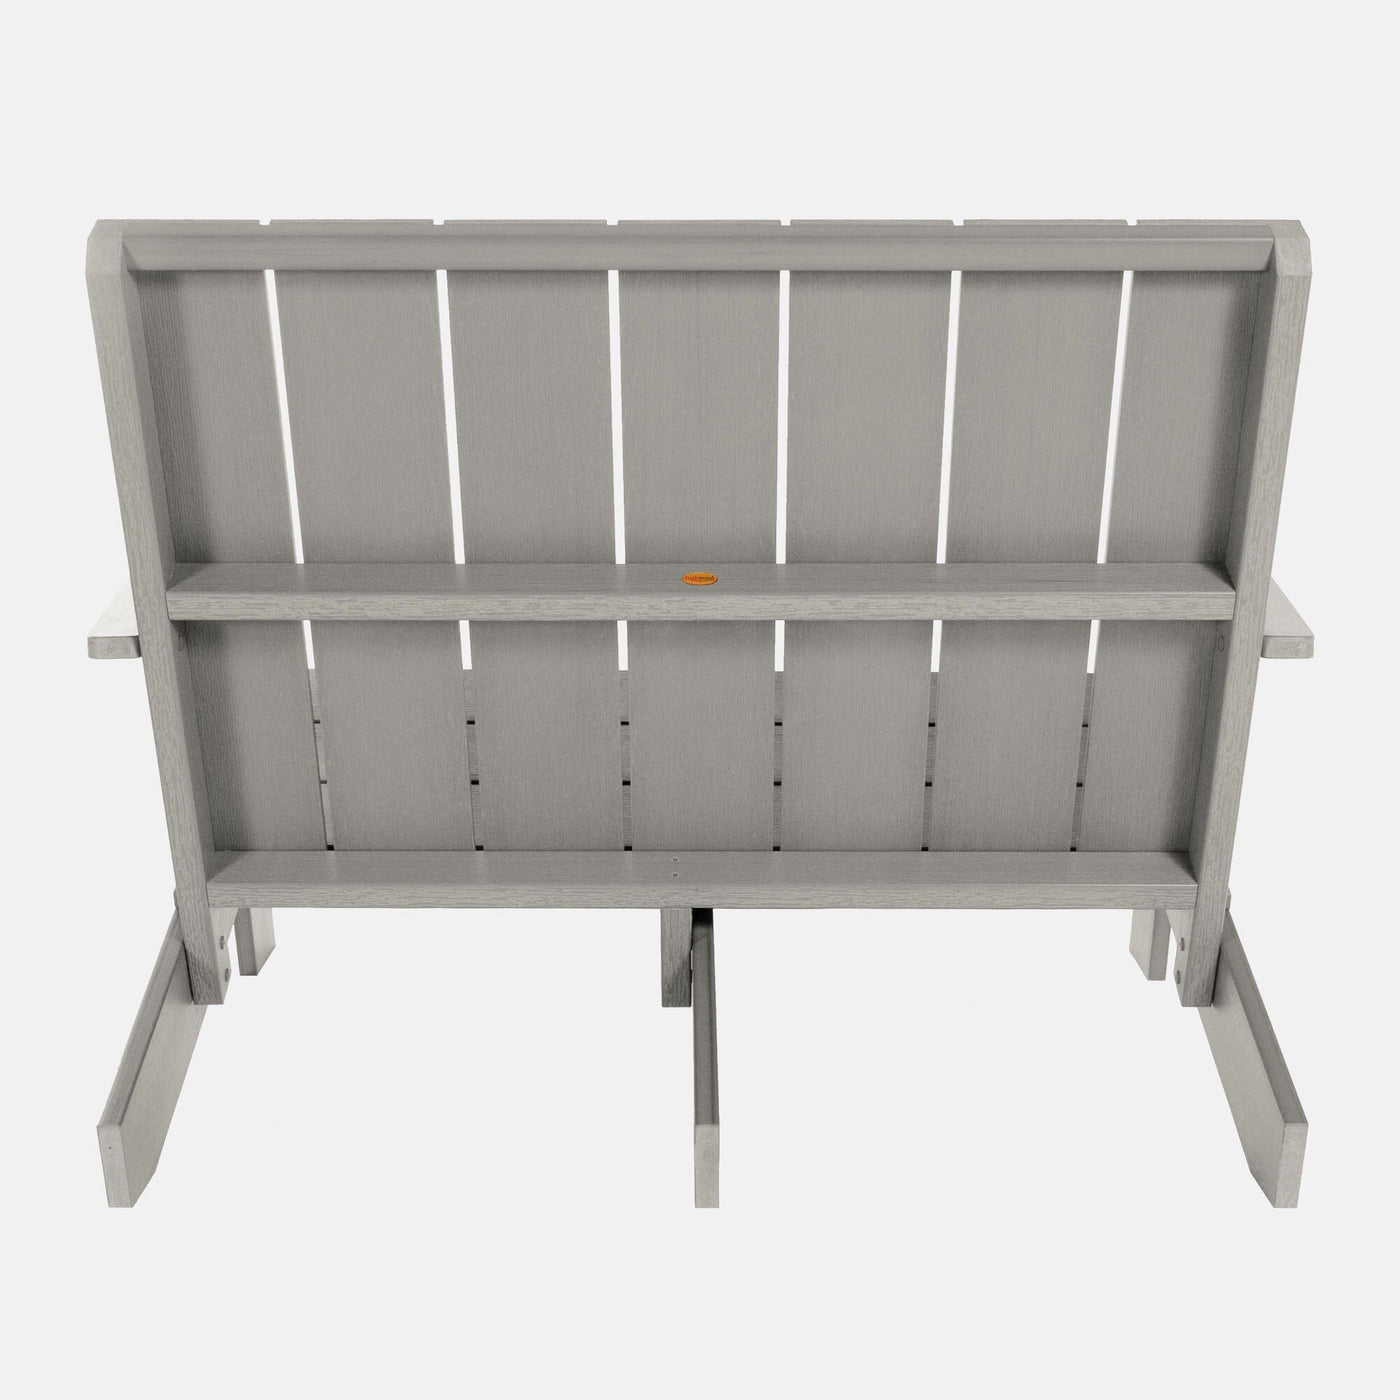 Back view of Italica Modern bench in Harbor Gray